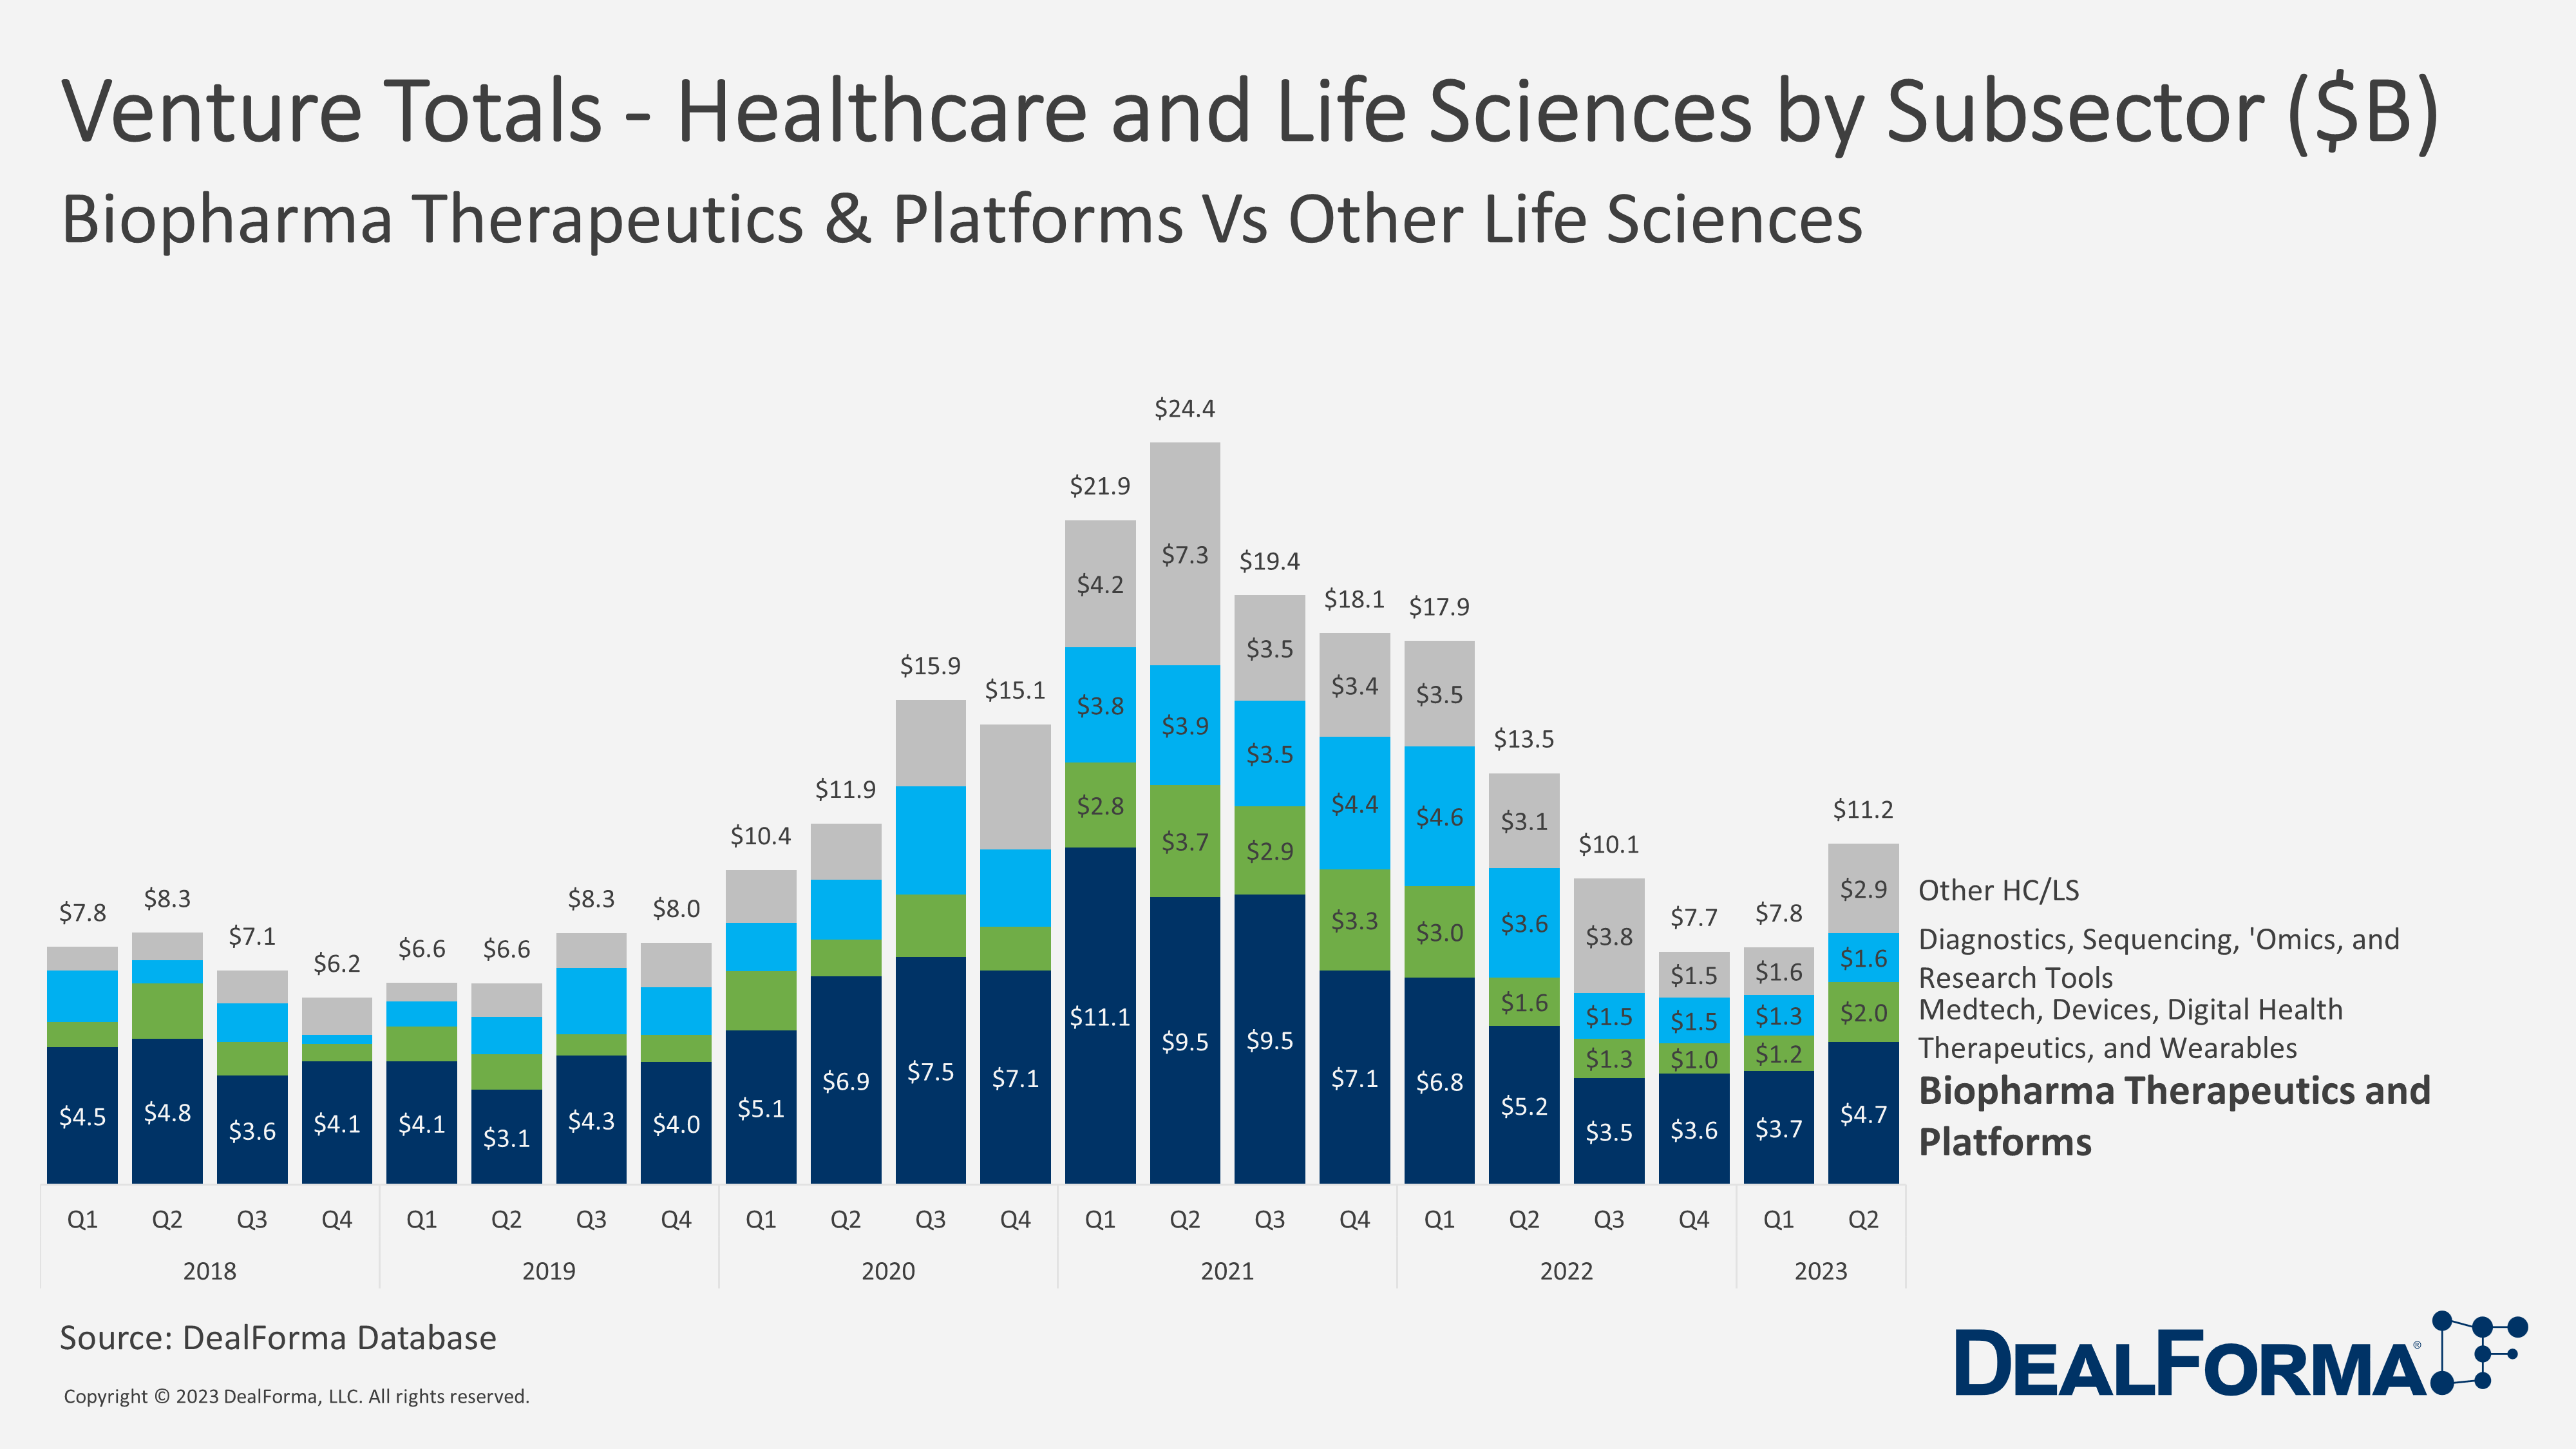 Venture Totals - Healthcare and Life Sciences by Subsector. Biopharma Therapeutics & Platforms Vs. Other Life Sciences